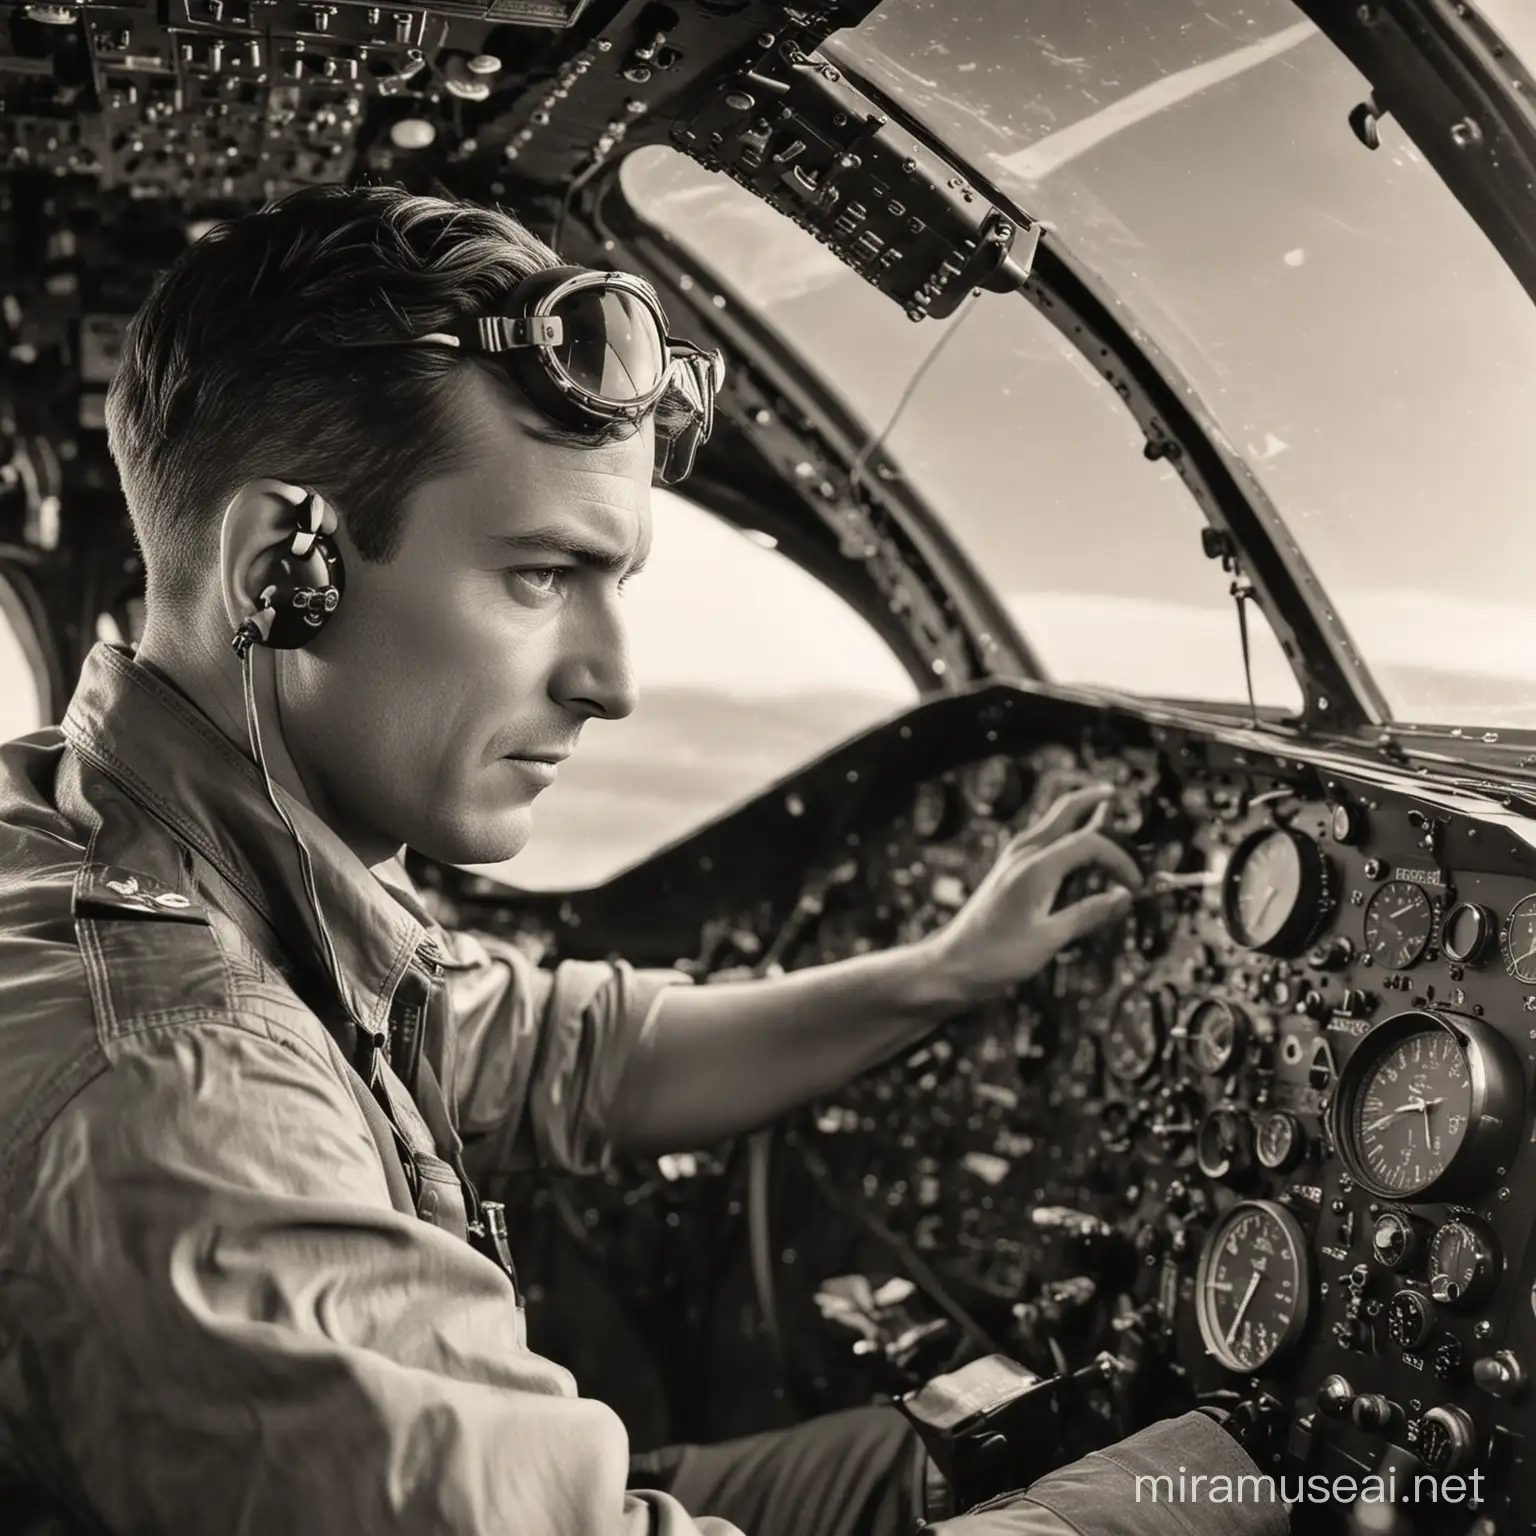 A photo of an 1940's airplane pilot, sitting in the cockpit of his aircraft, looking at his navigation radar, and where you can see all the controls and dials. Pay particular attention to the face, making sure it is distinct from the controls.